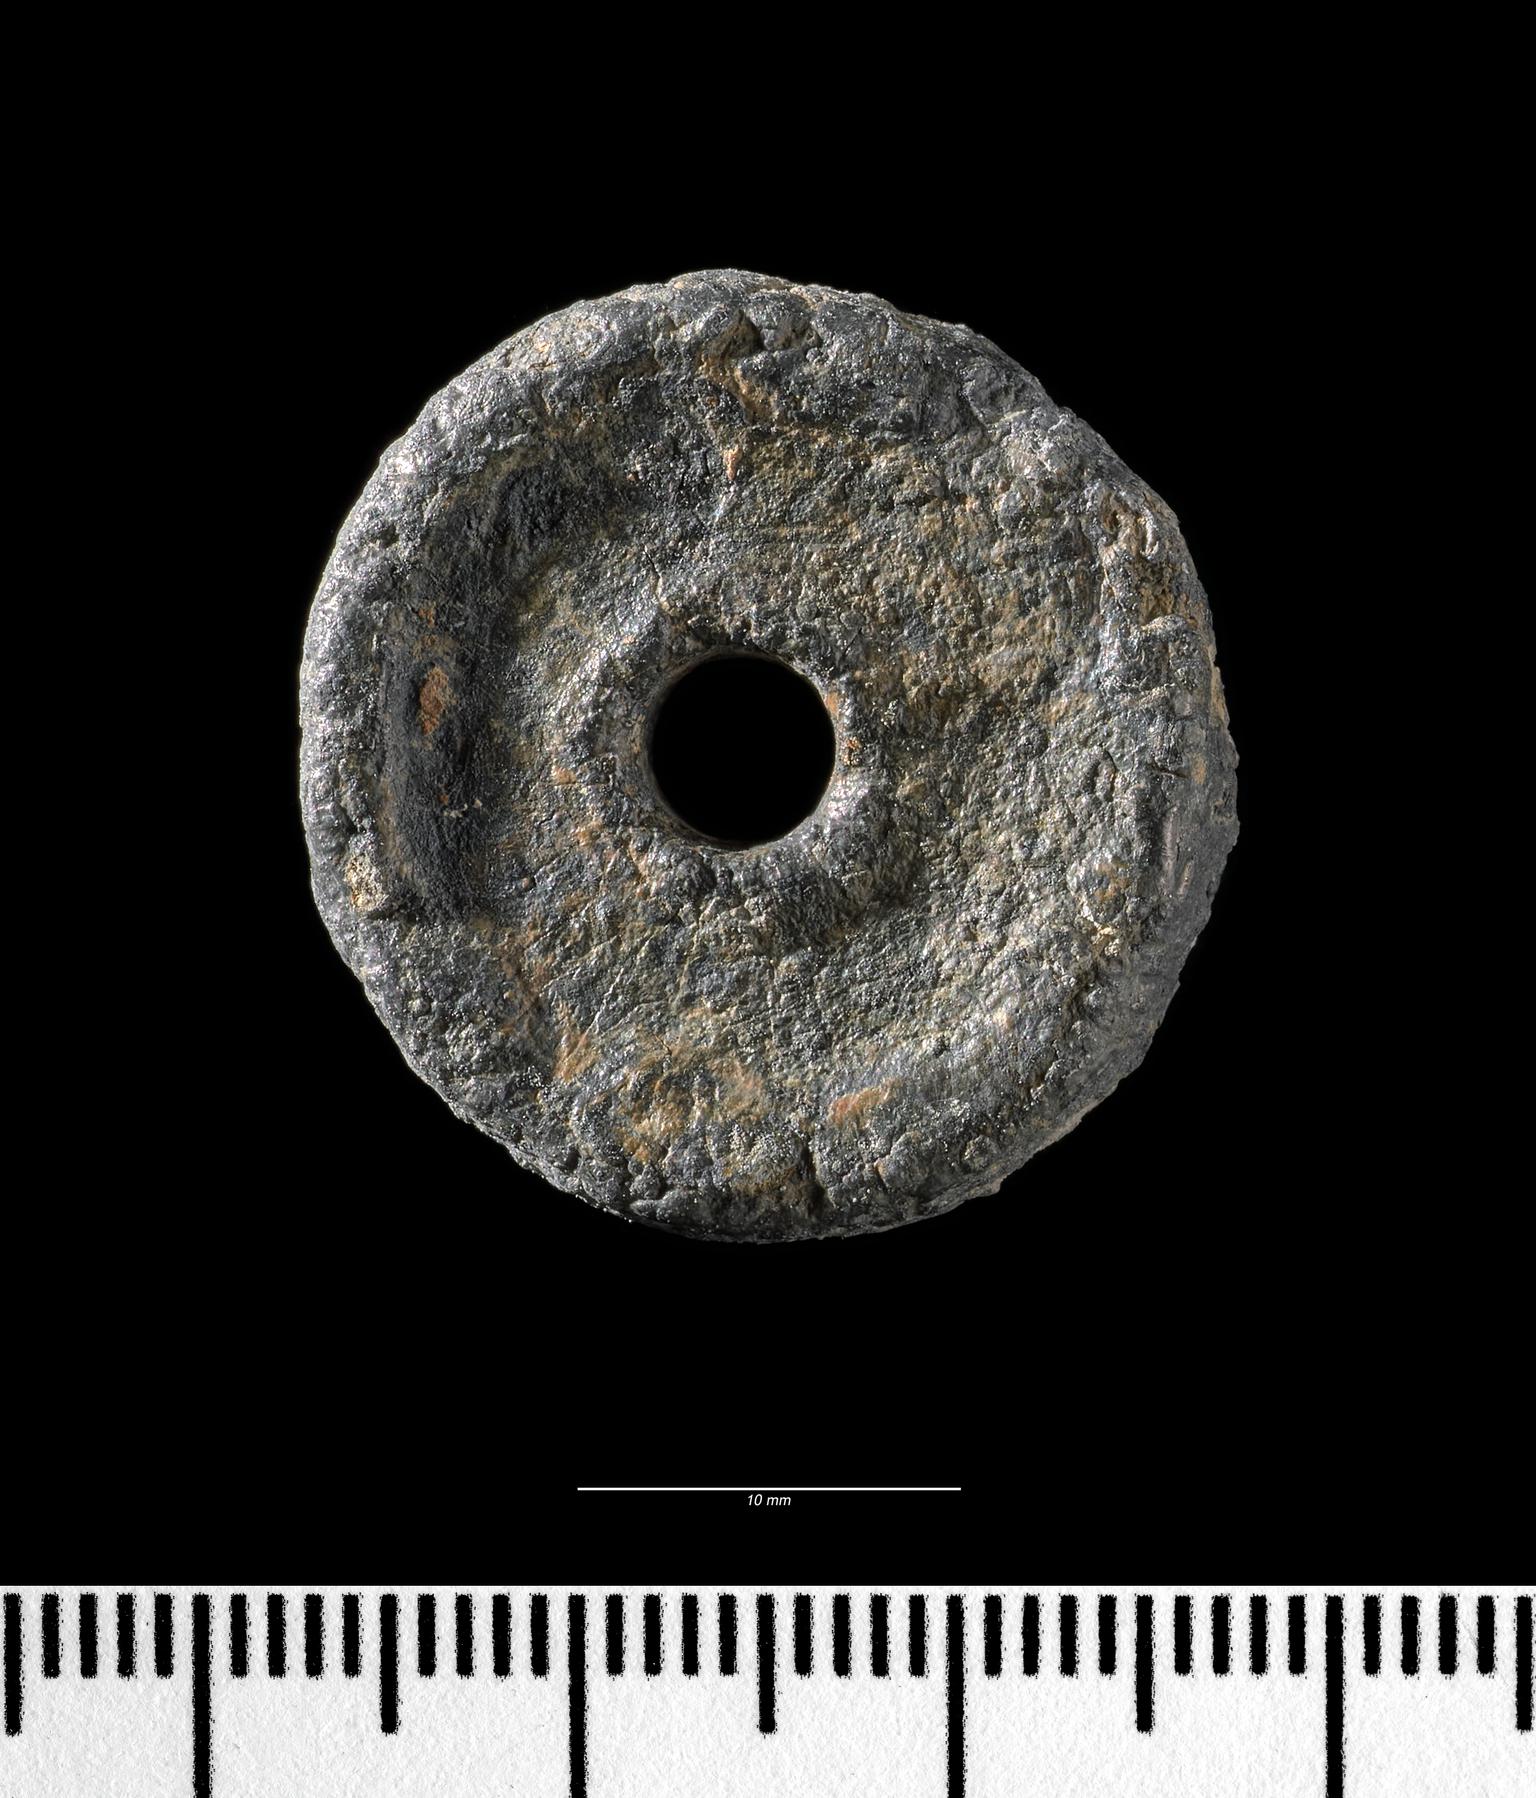 Early Medieval lead spindle whorl